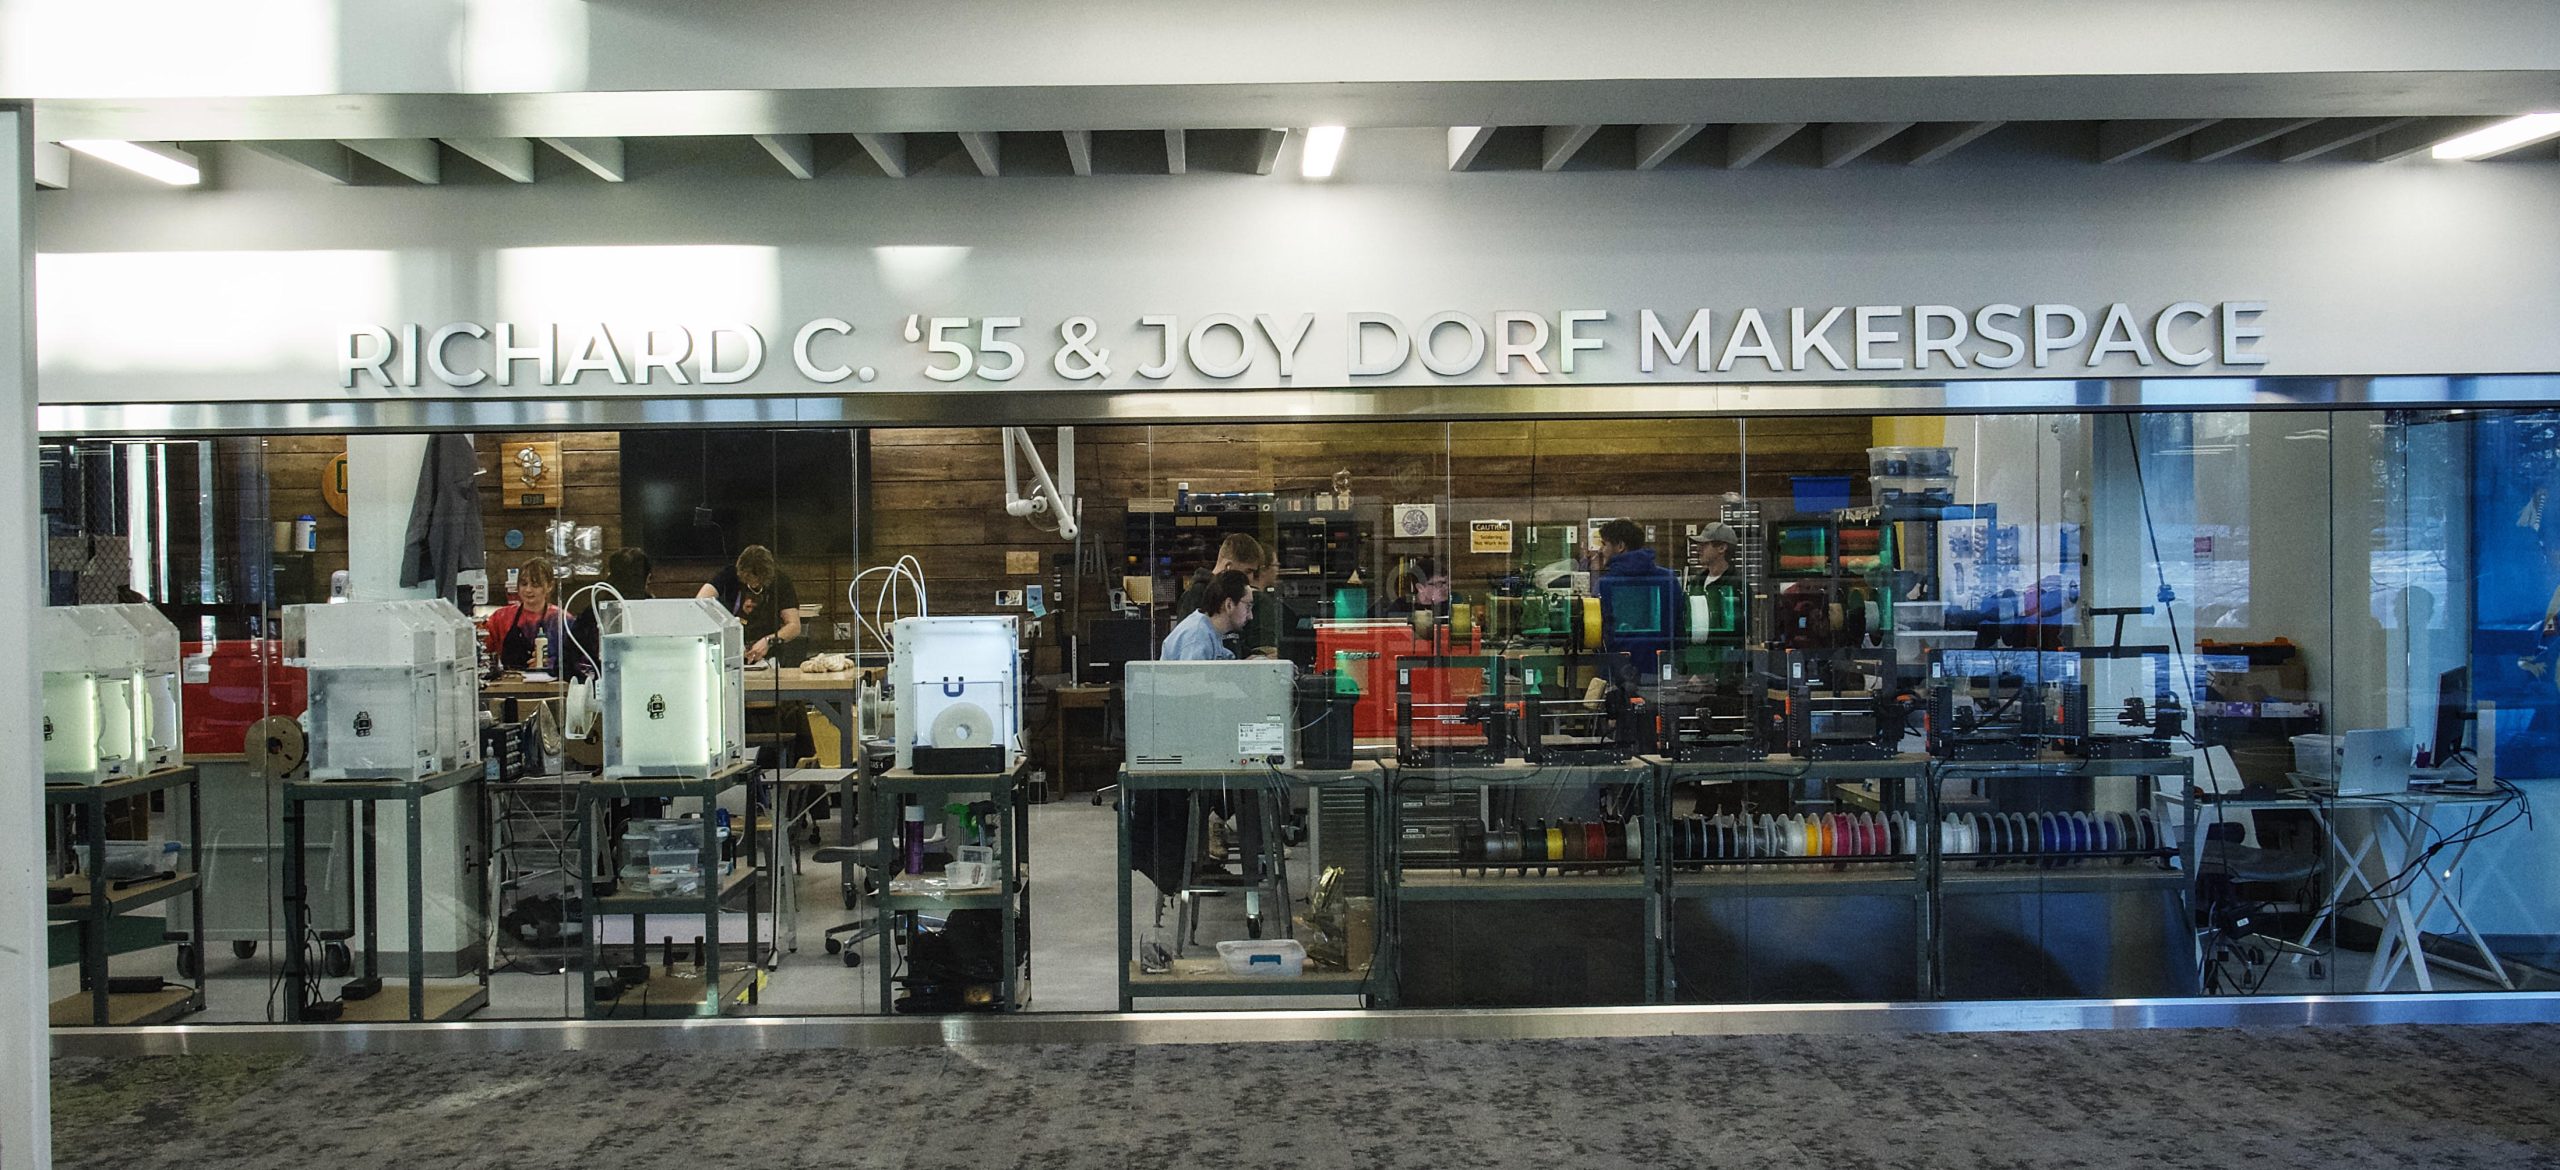 the front of the Richard C. '55 & Joy Dorf Makerspace, located on the first floor of the Educational Resource Center.